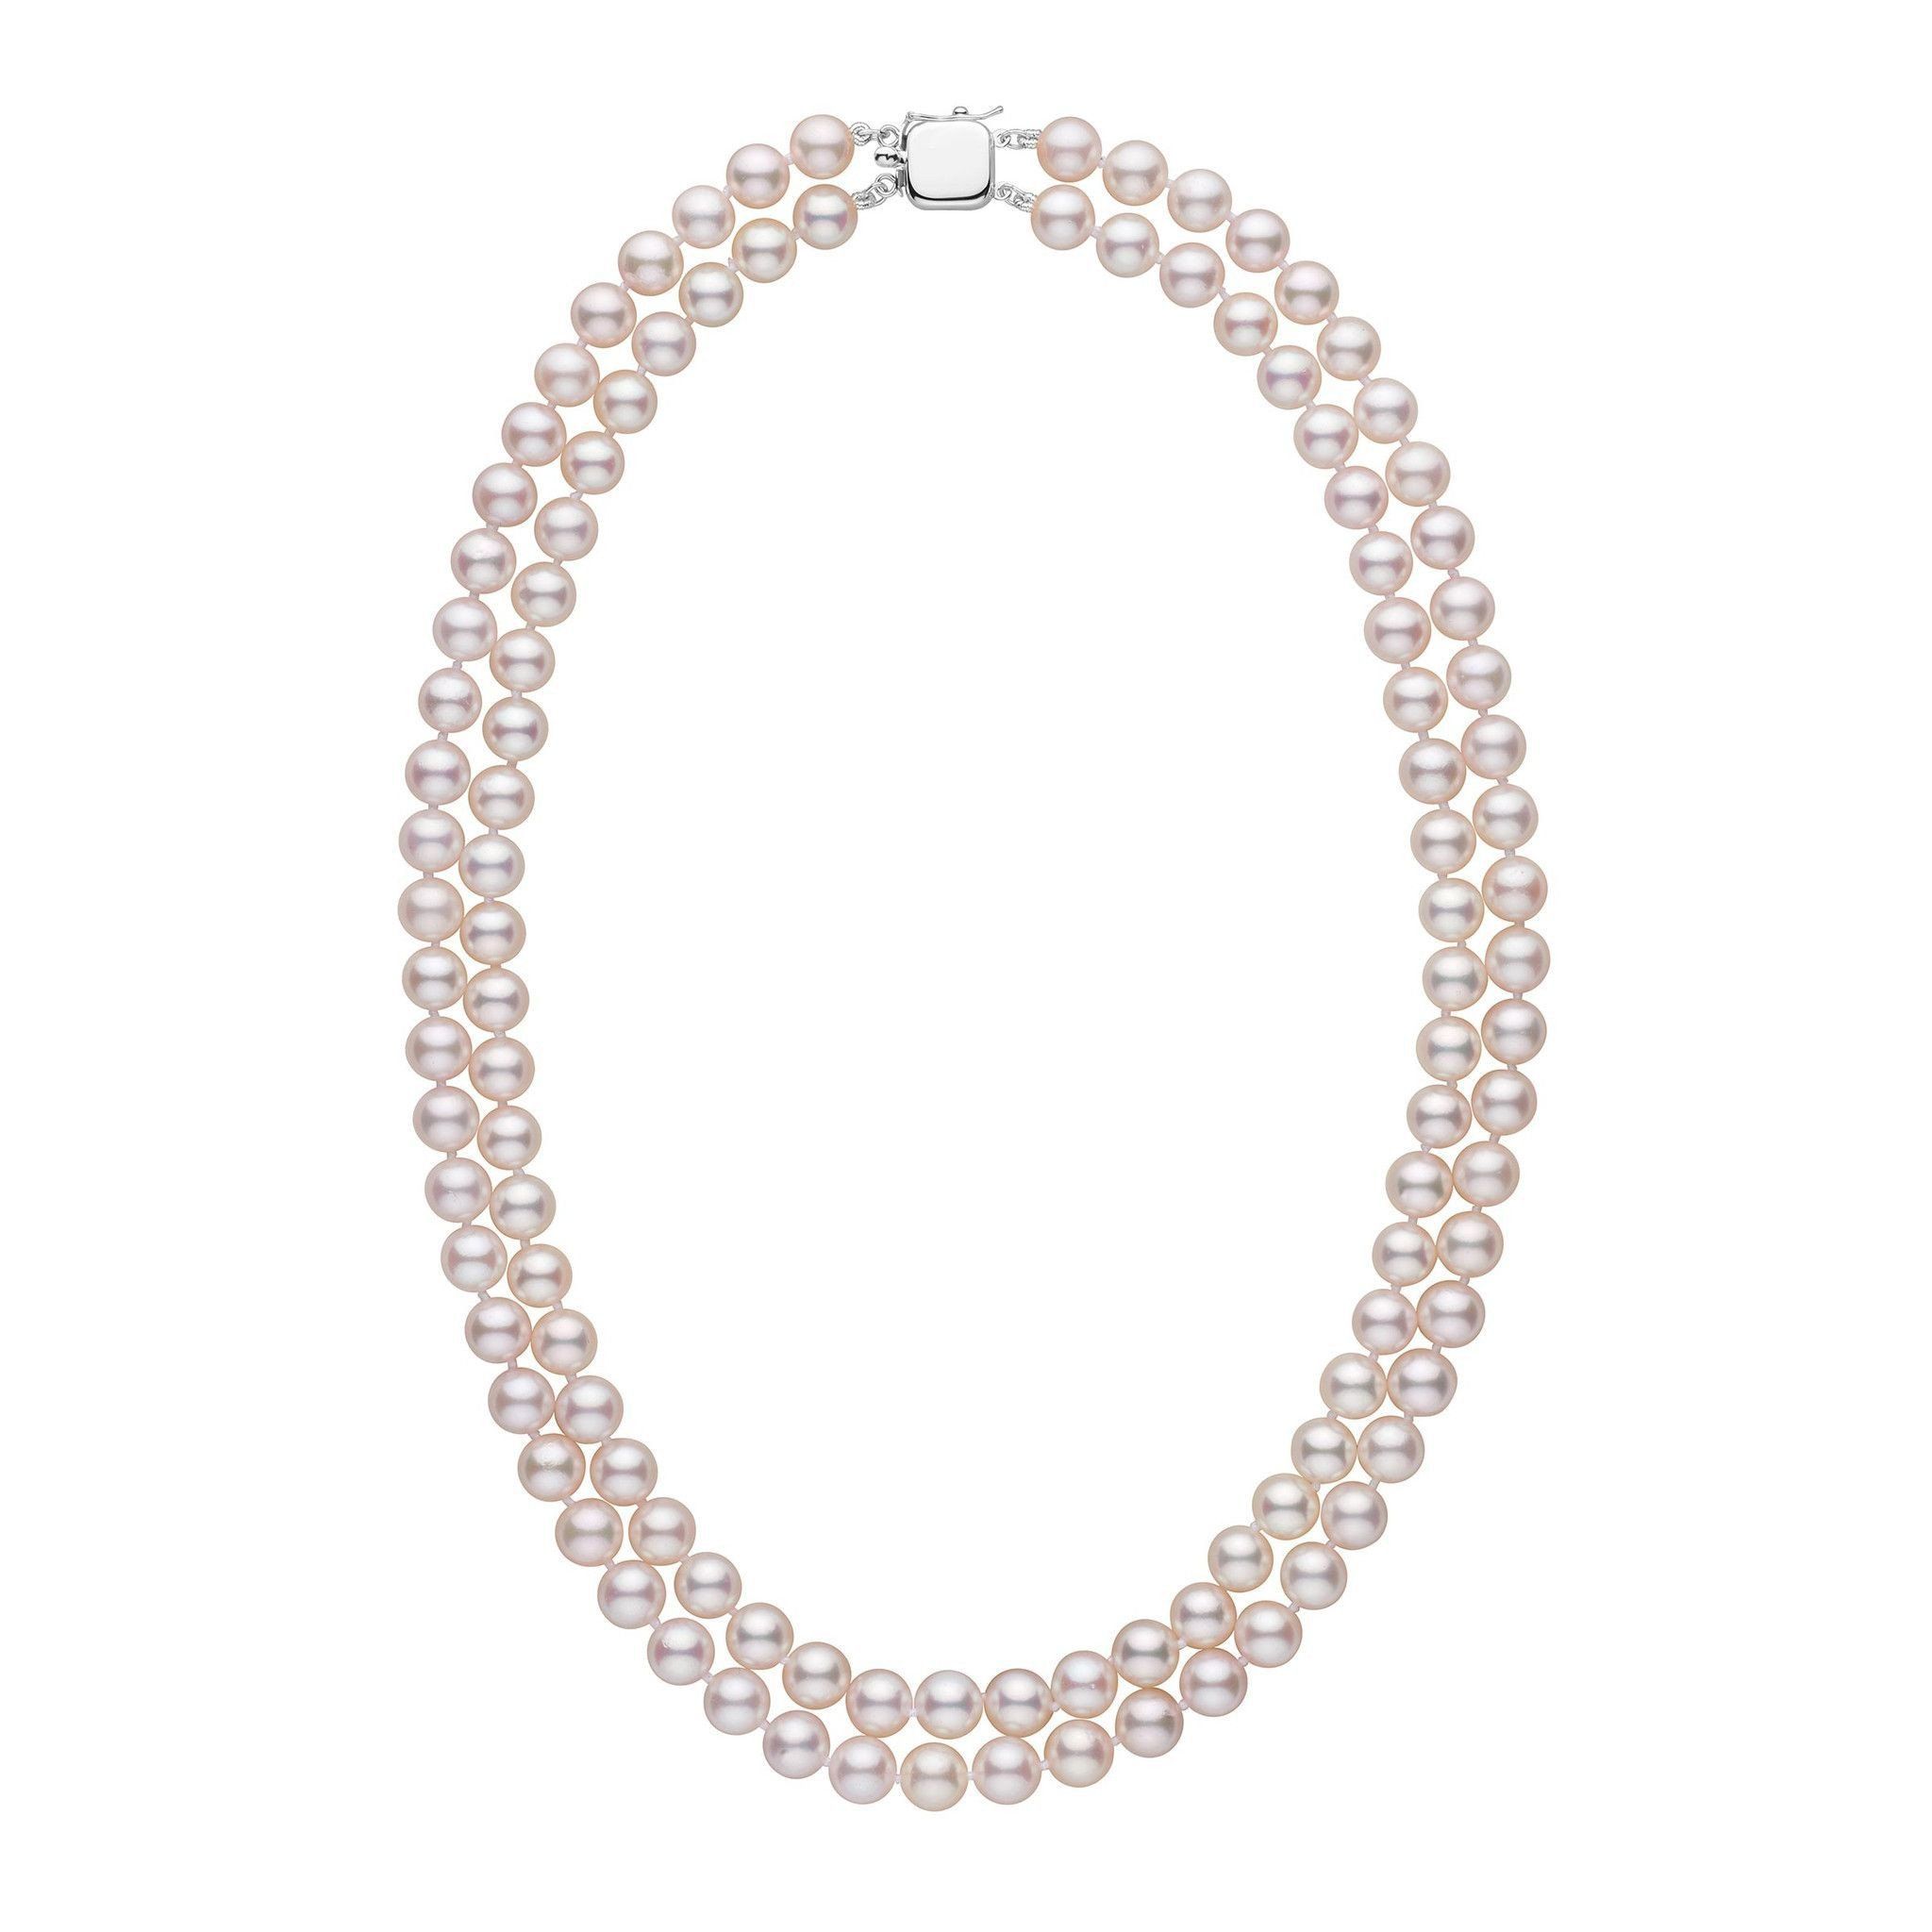 7.0-7.5 mm 18-inch AAA Double-Strand White Akoya Pearl Necklace White Gold